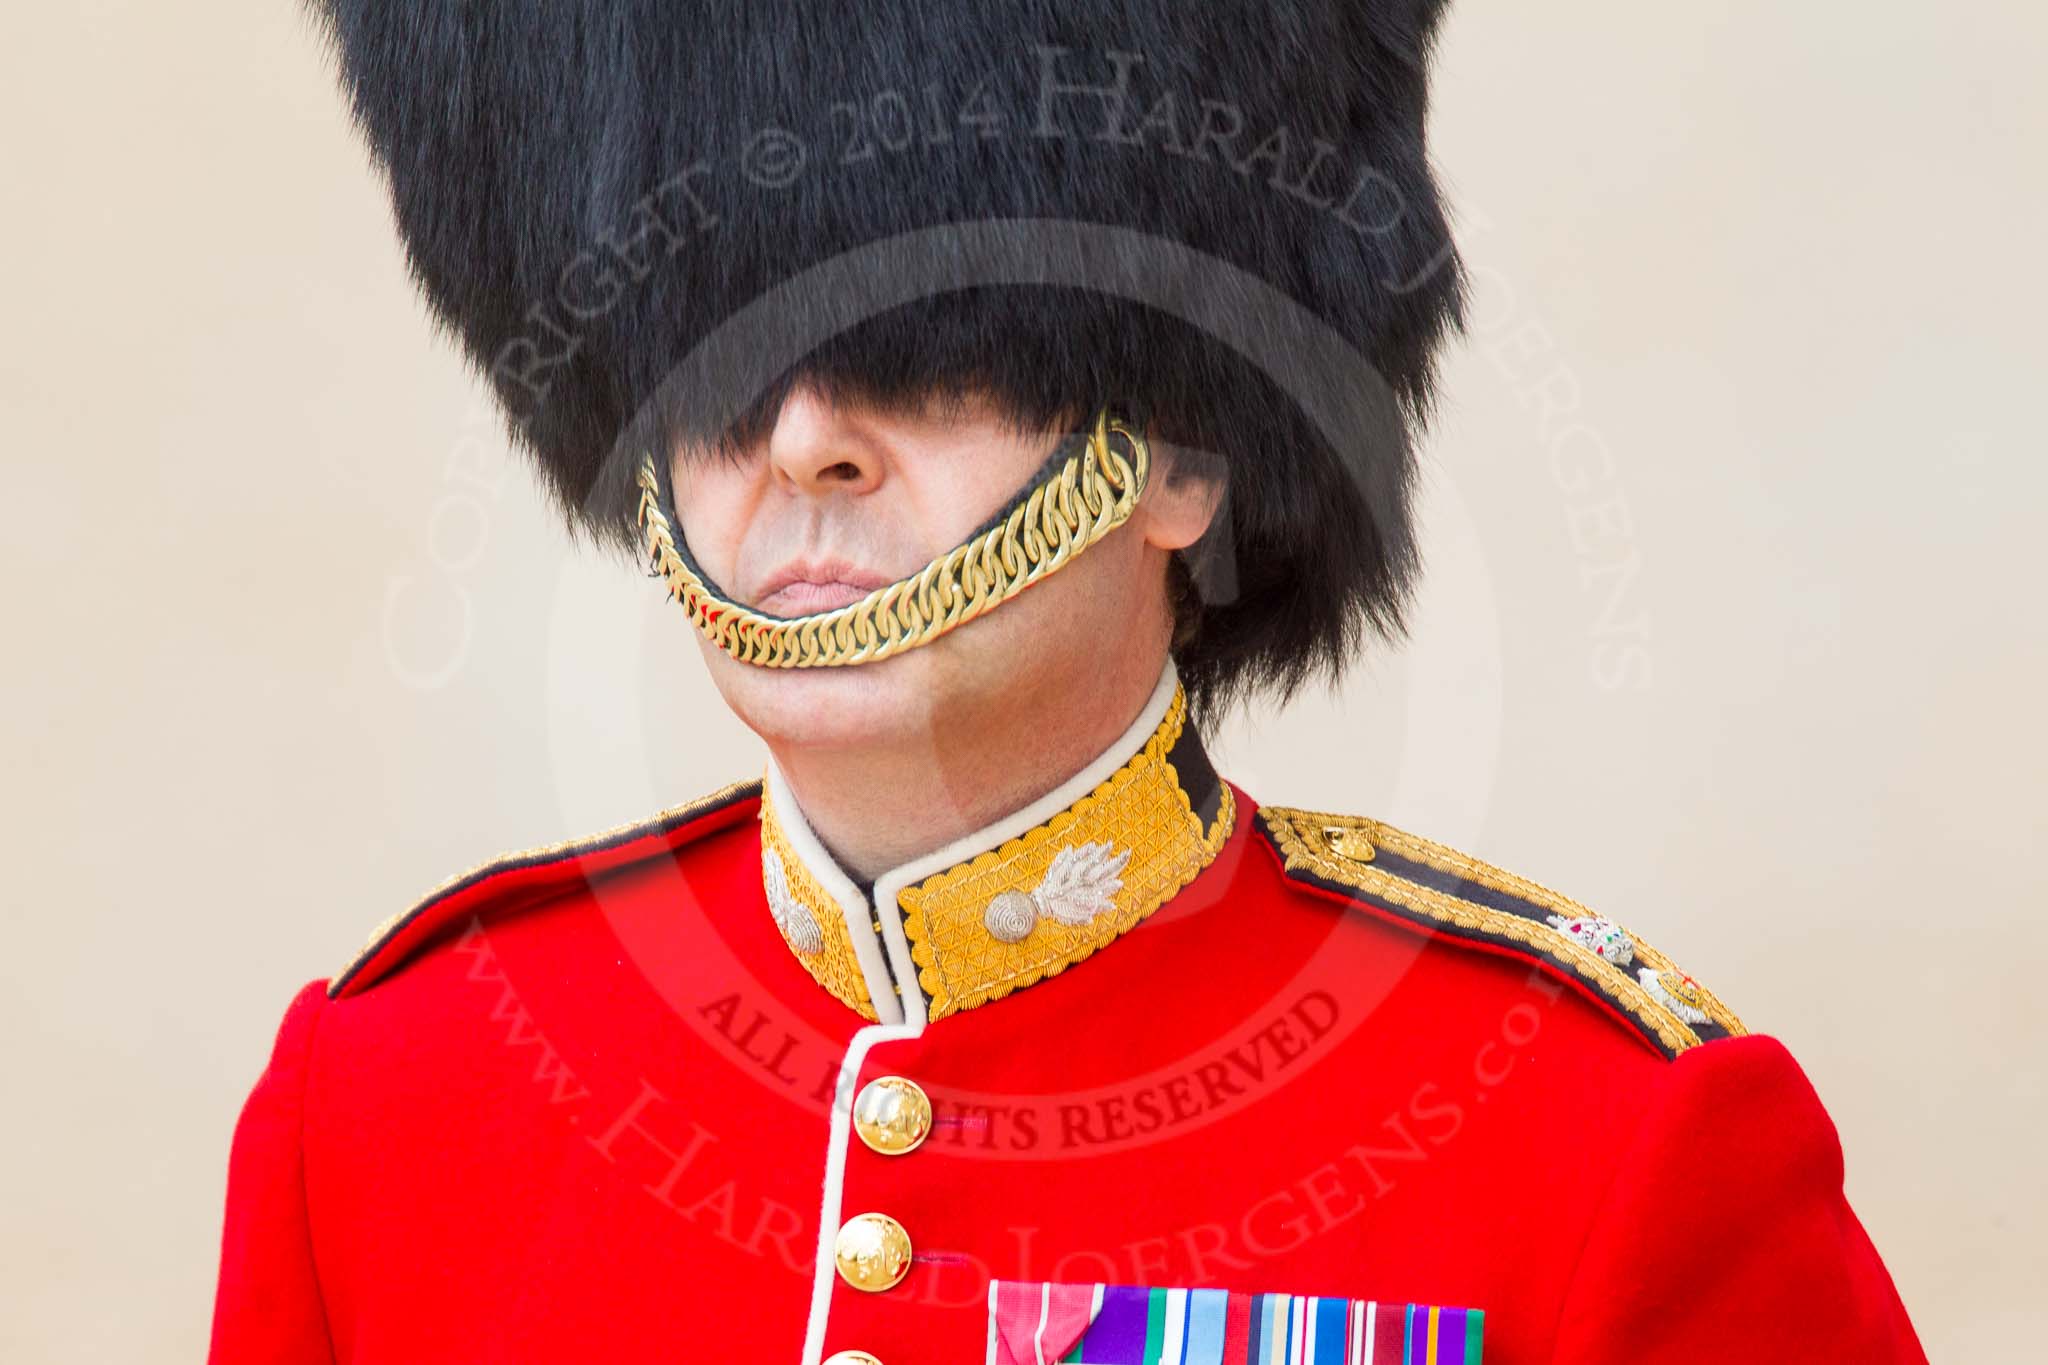 Trooping the Colour 2014.
Horse Guards Parade, Westminster,
London SW1A,

United Kingdom,
on 14 June 2014 at 10:24, image #129